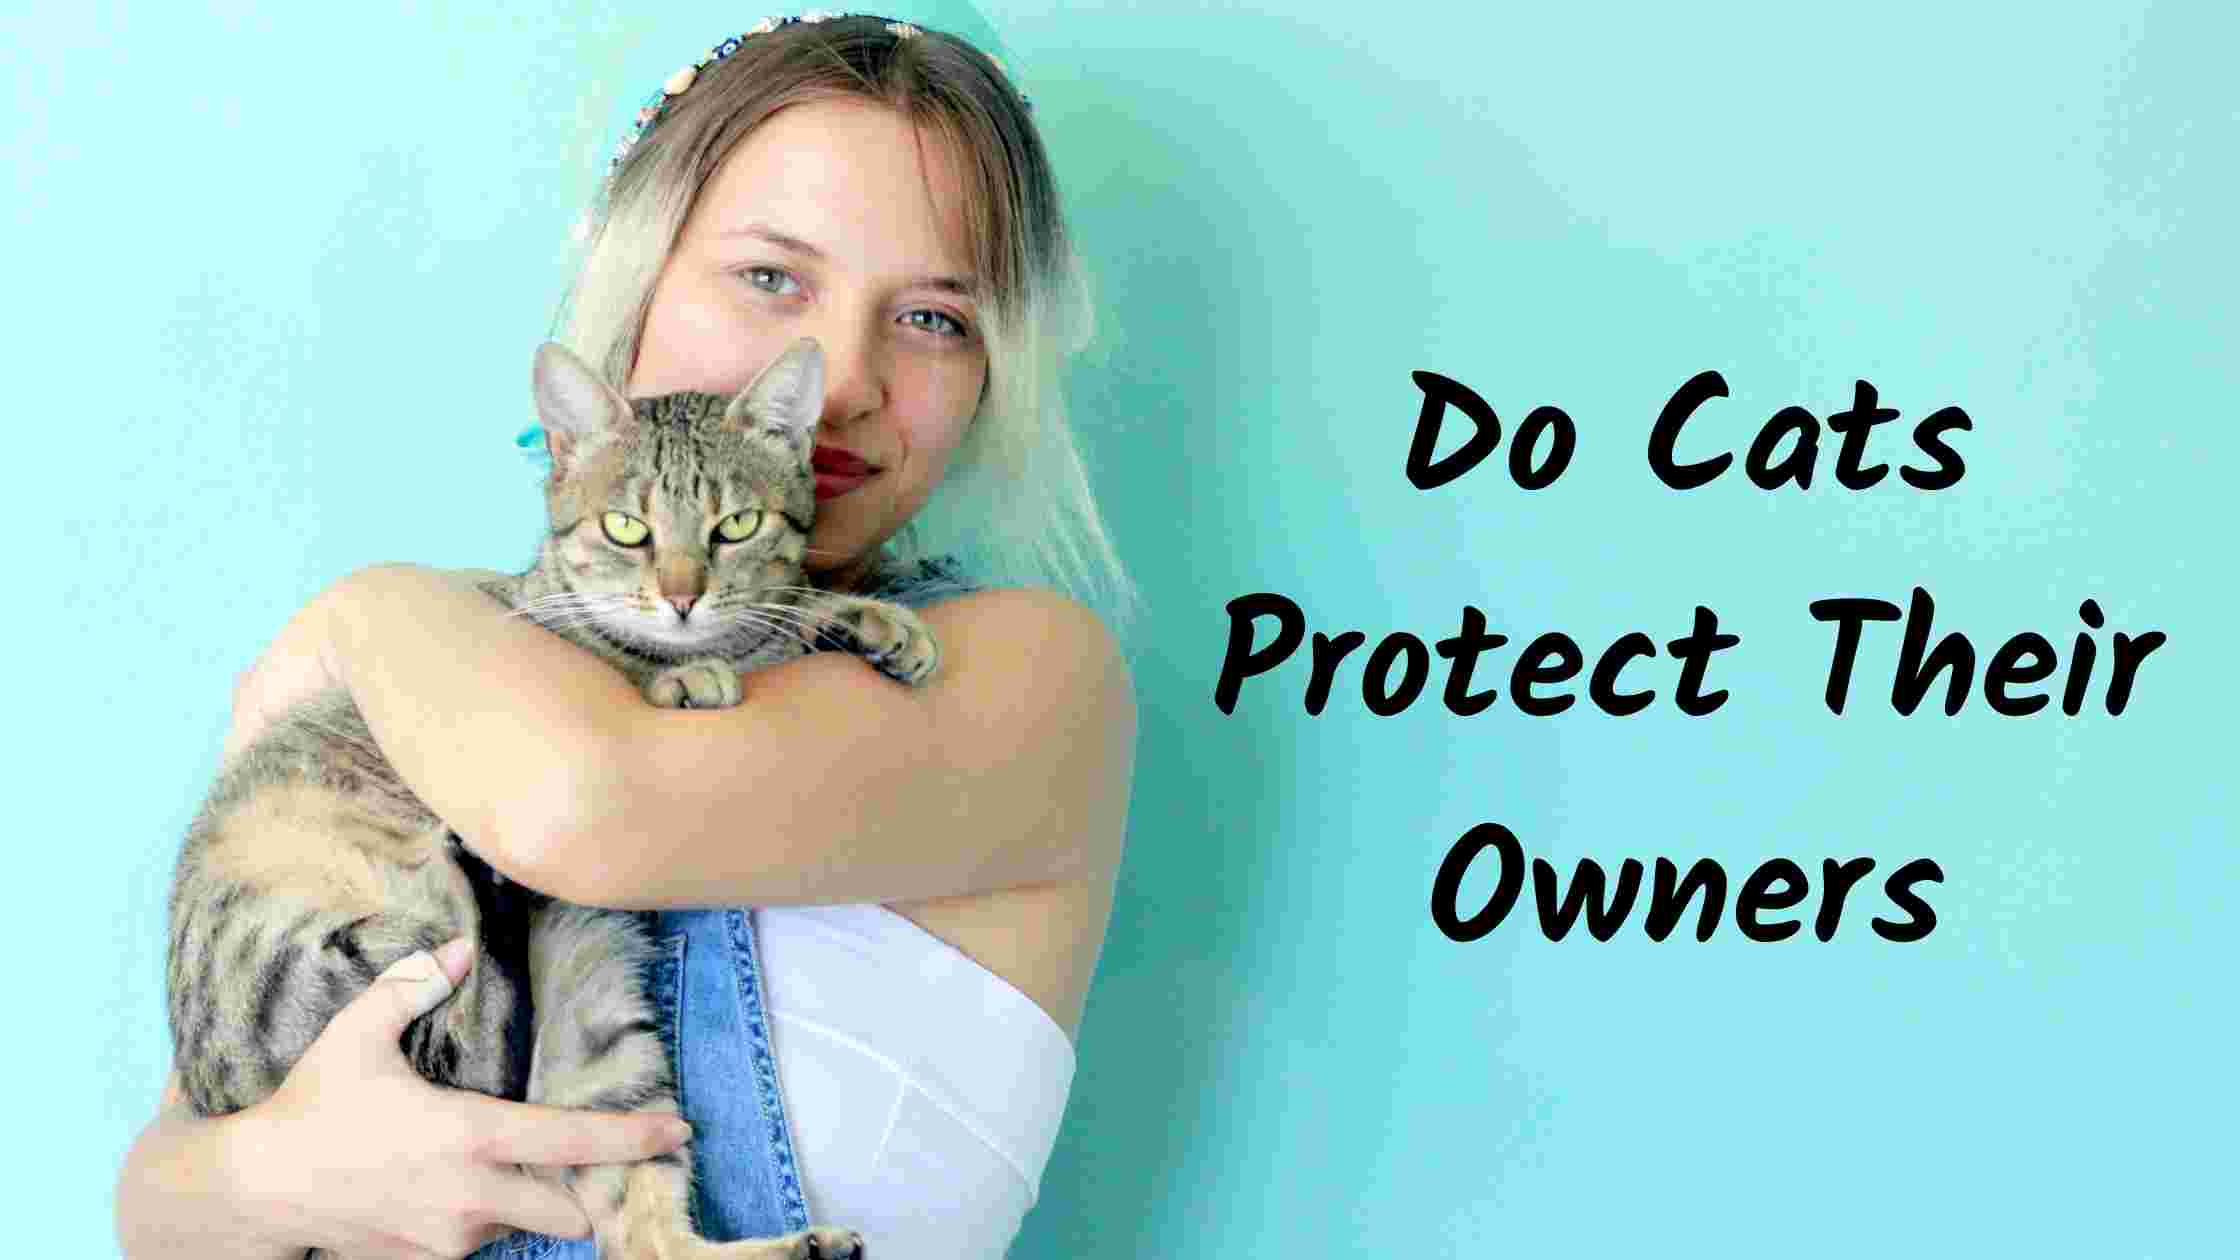 Do Cats Protect Their Owners